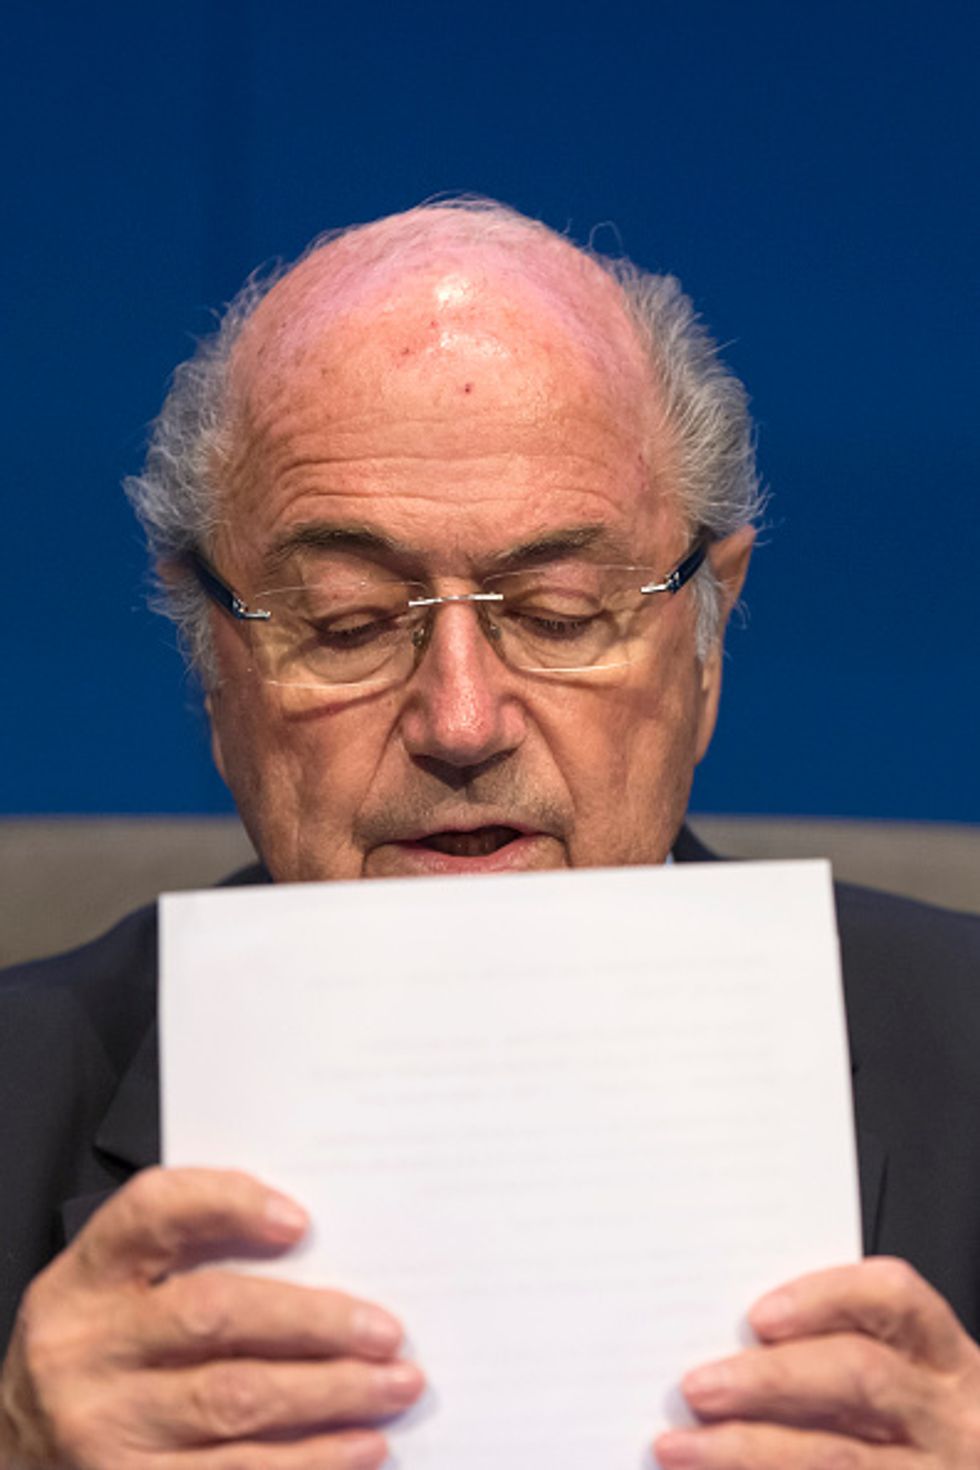 Definitely That Is Not Me': FIFA President Has Defiant Words About the U.S. Investigation of Soccer Corruption